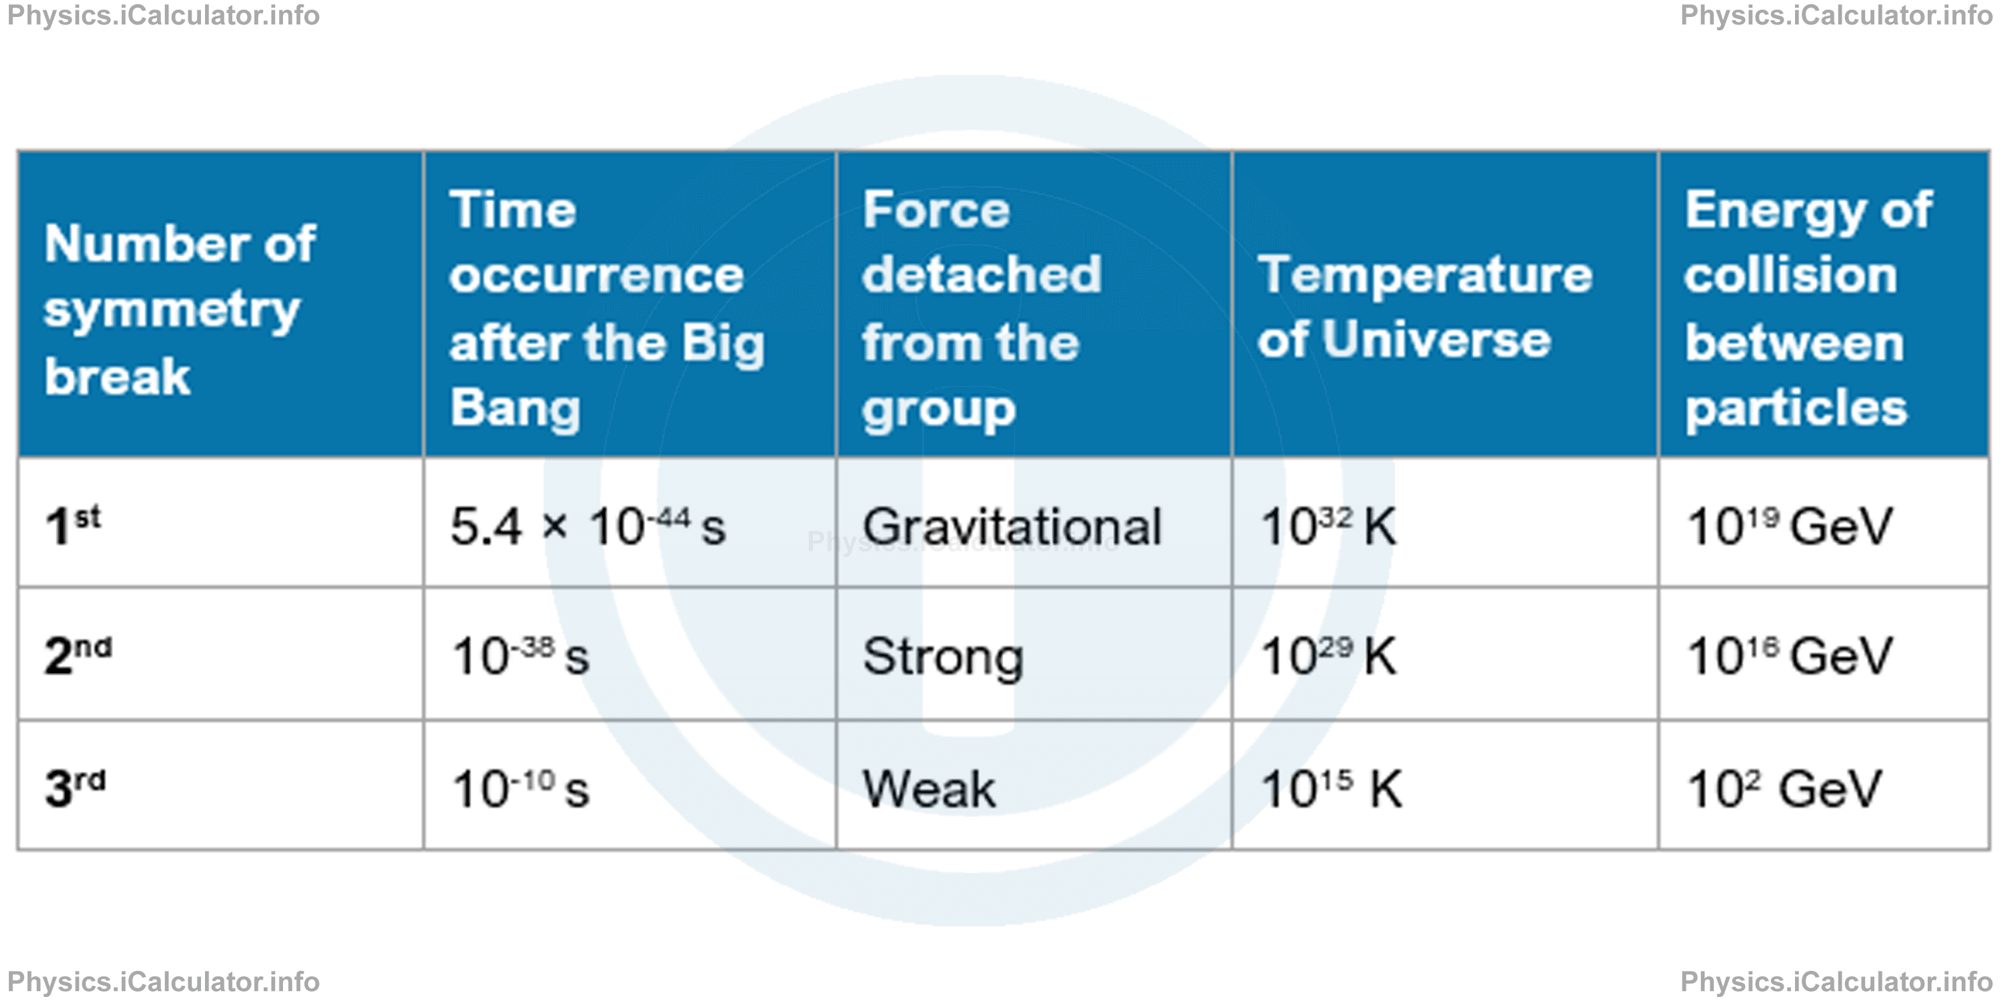 Physics Tutorials: This image provides visual information for the physics tutorial Chronology of the Universe 